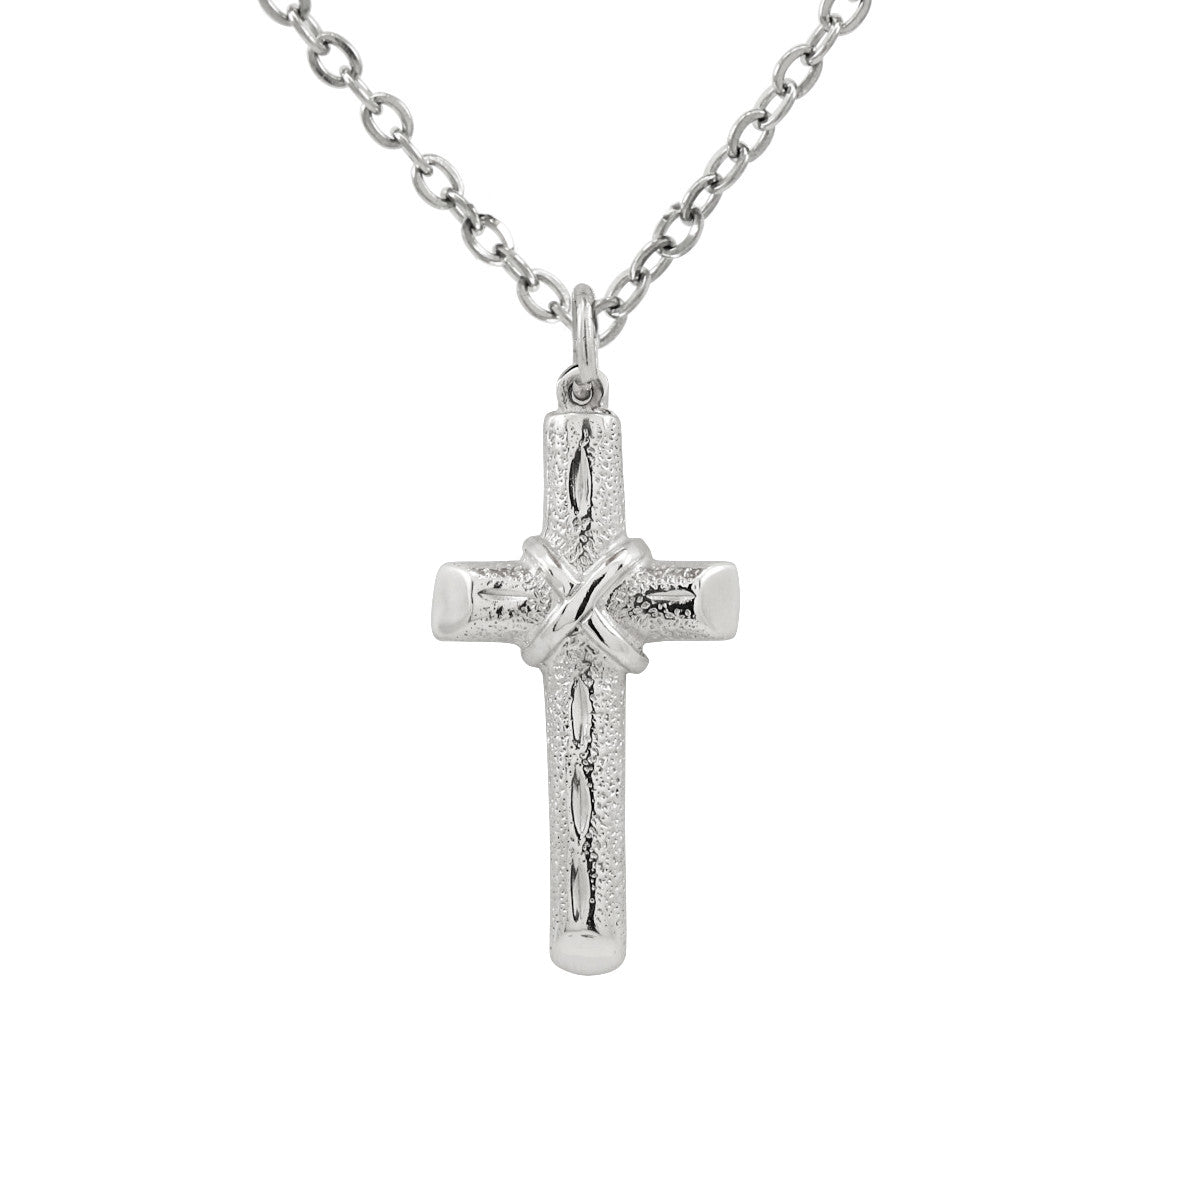 .925 Sterling Silver Textured Knot Cross Pendant With 22" Hypoallergenic Cable Chain Necklace